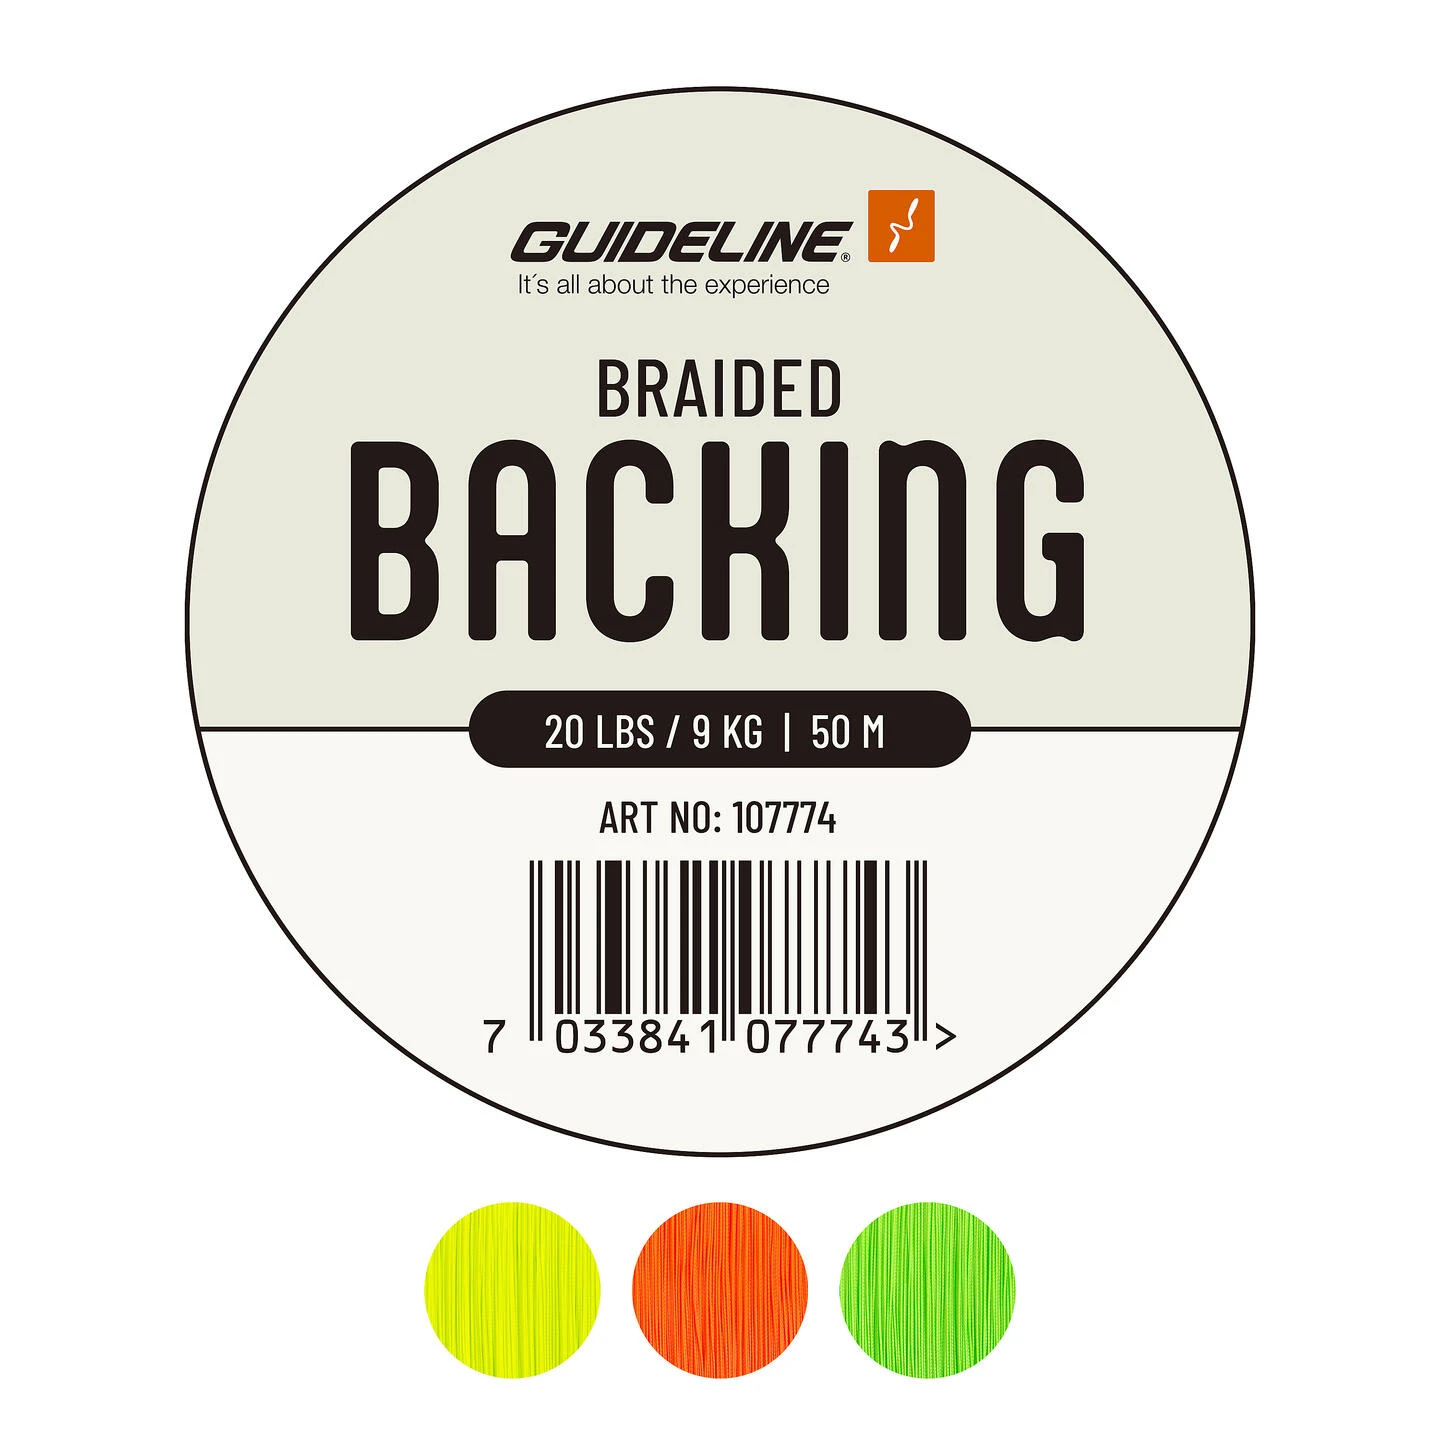 Guideline Braided Backing 20lbs 50m